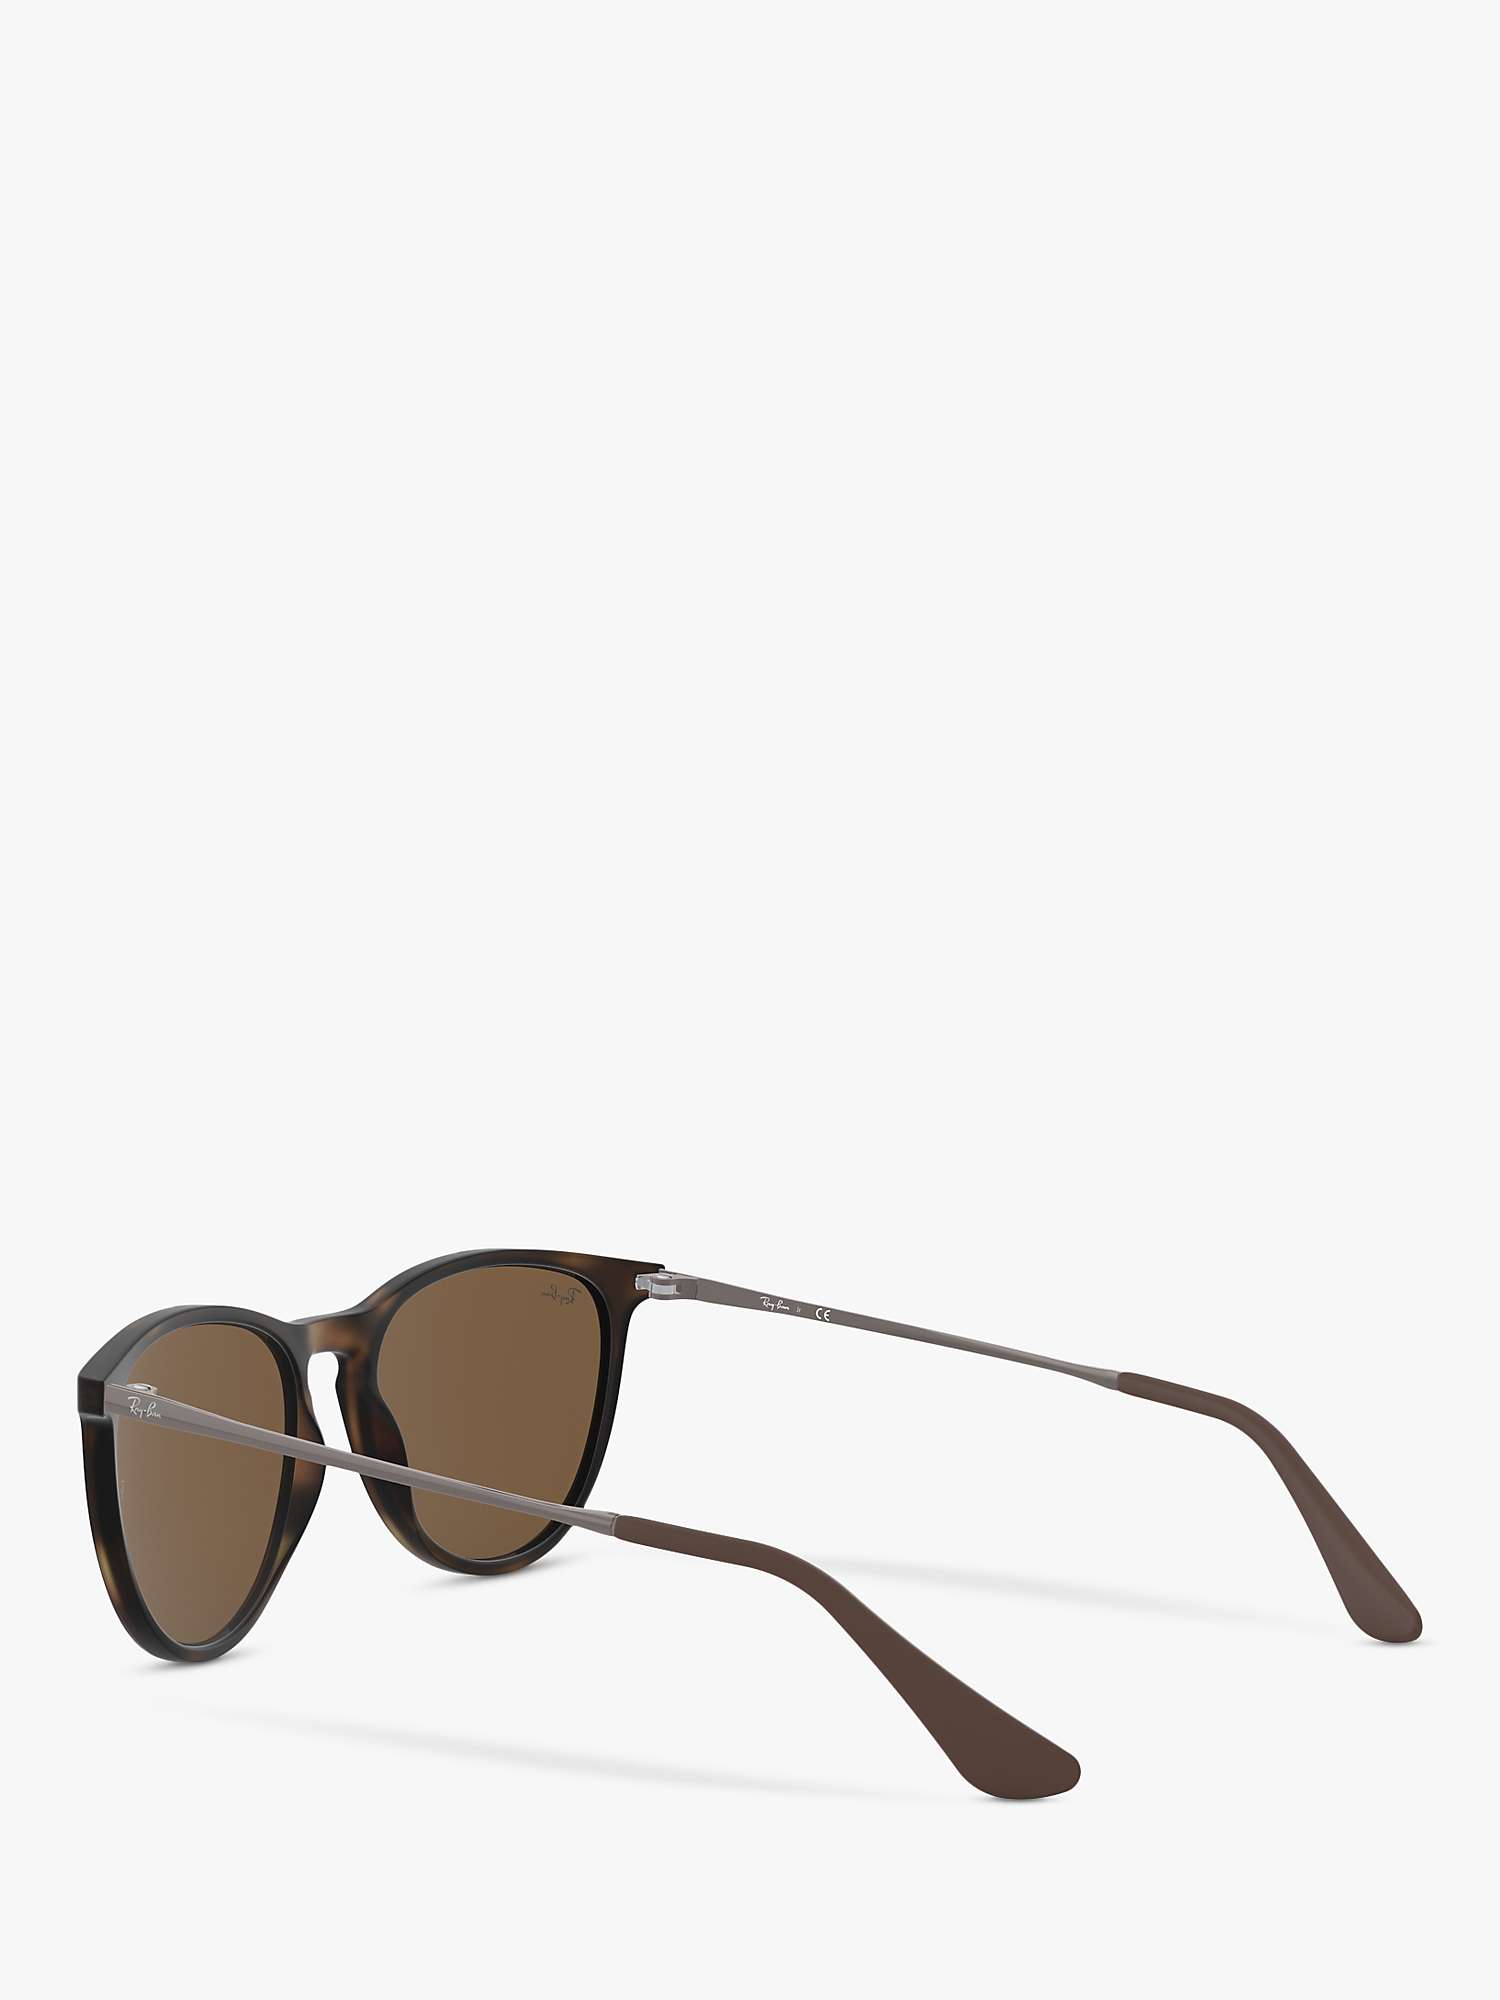 Buy Ray-Ban Junior RJ9060S Izzy Oval Sunglasses Online at johnlewis.com